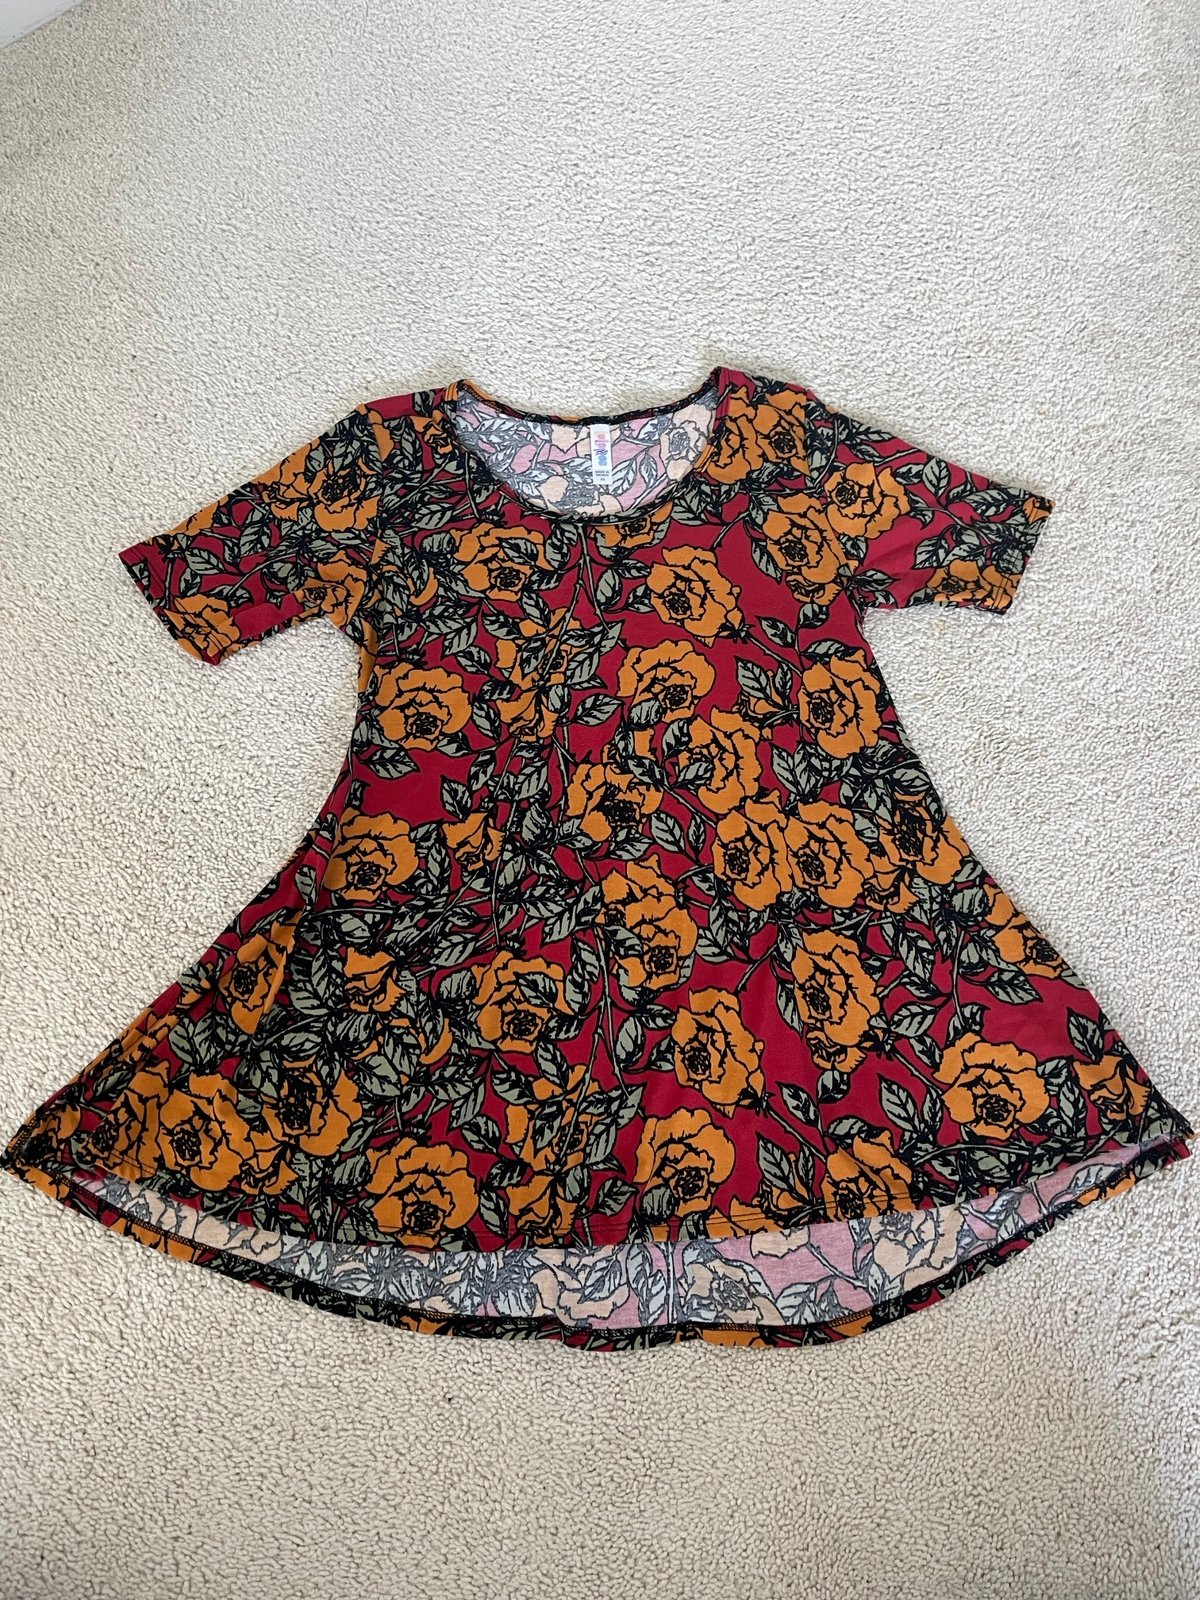 Perfect Lularoe jQGmLPUJA Outlet Store